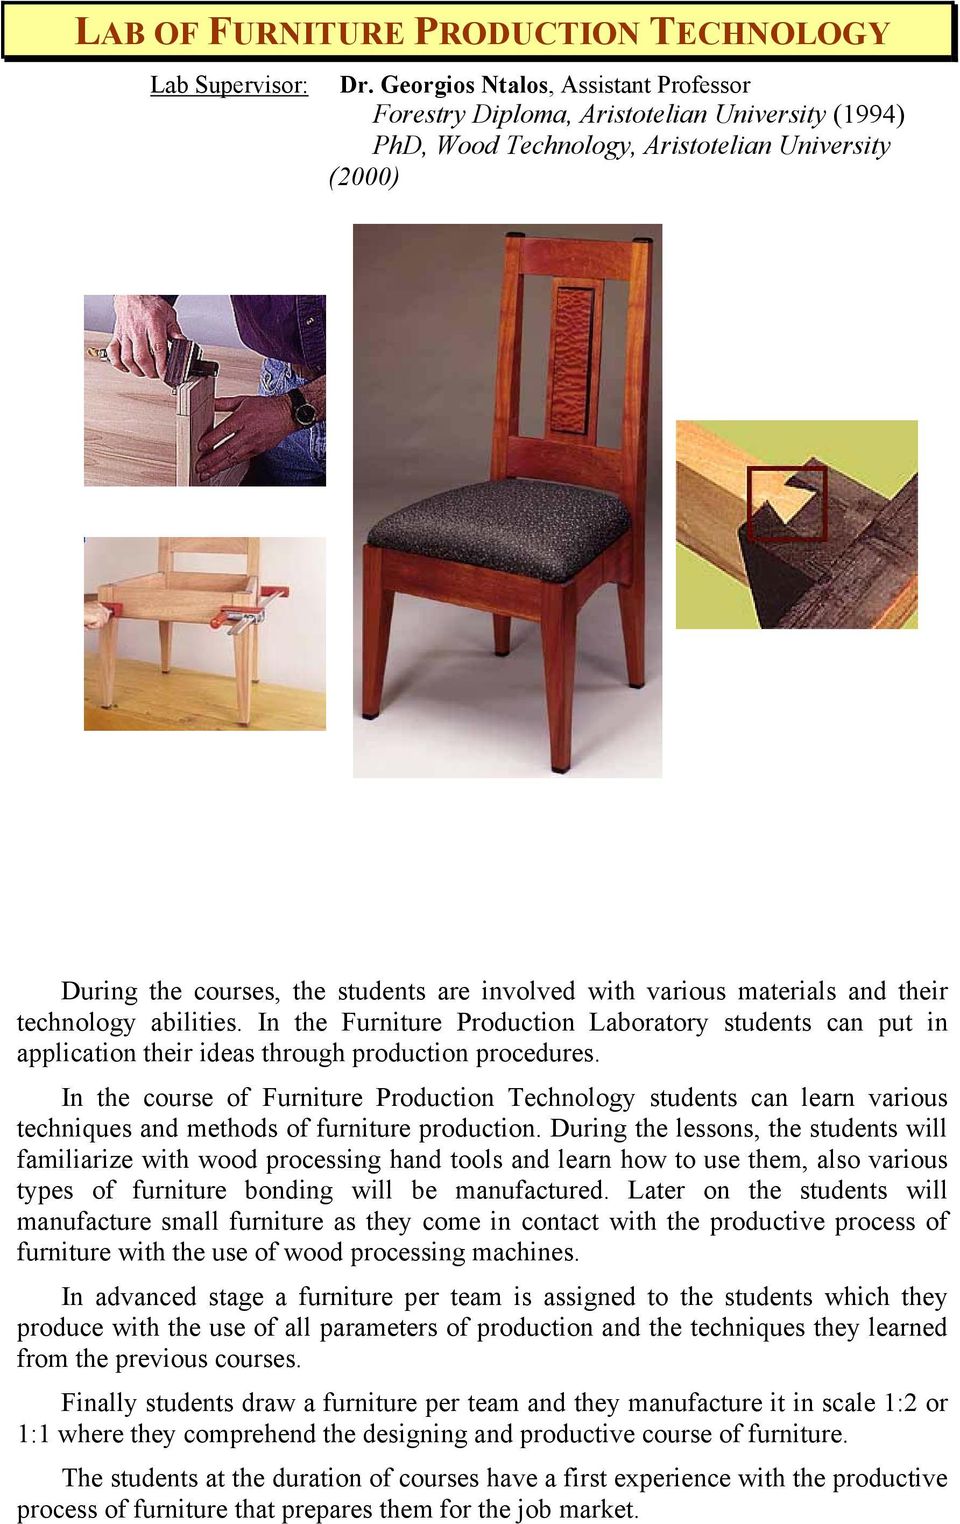 materials and their technology abilities. In the Furniture Production Laboratory students can put in application their ideas through production procedures.